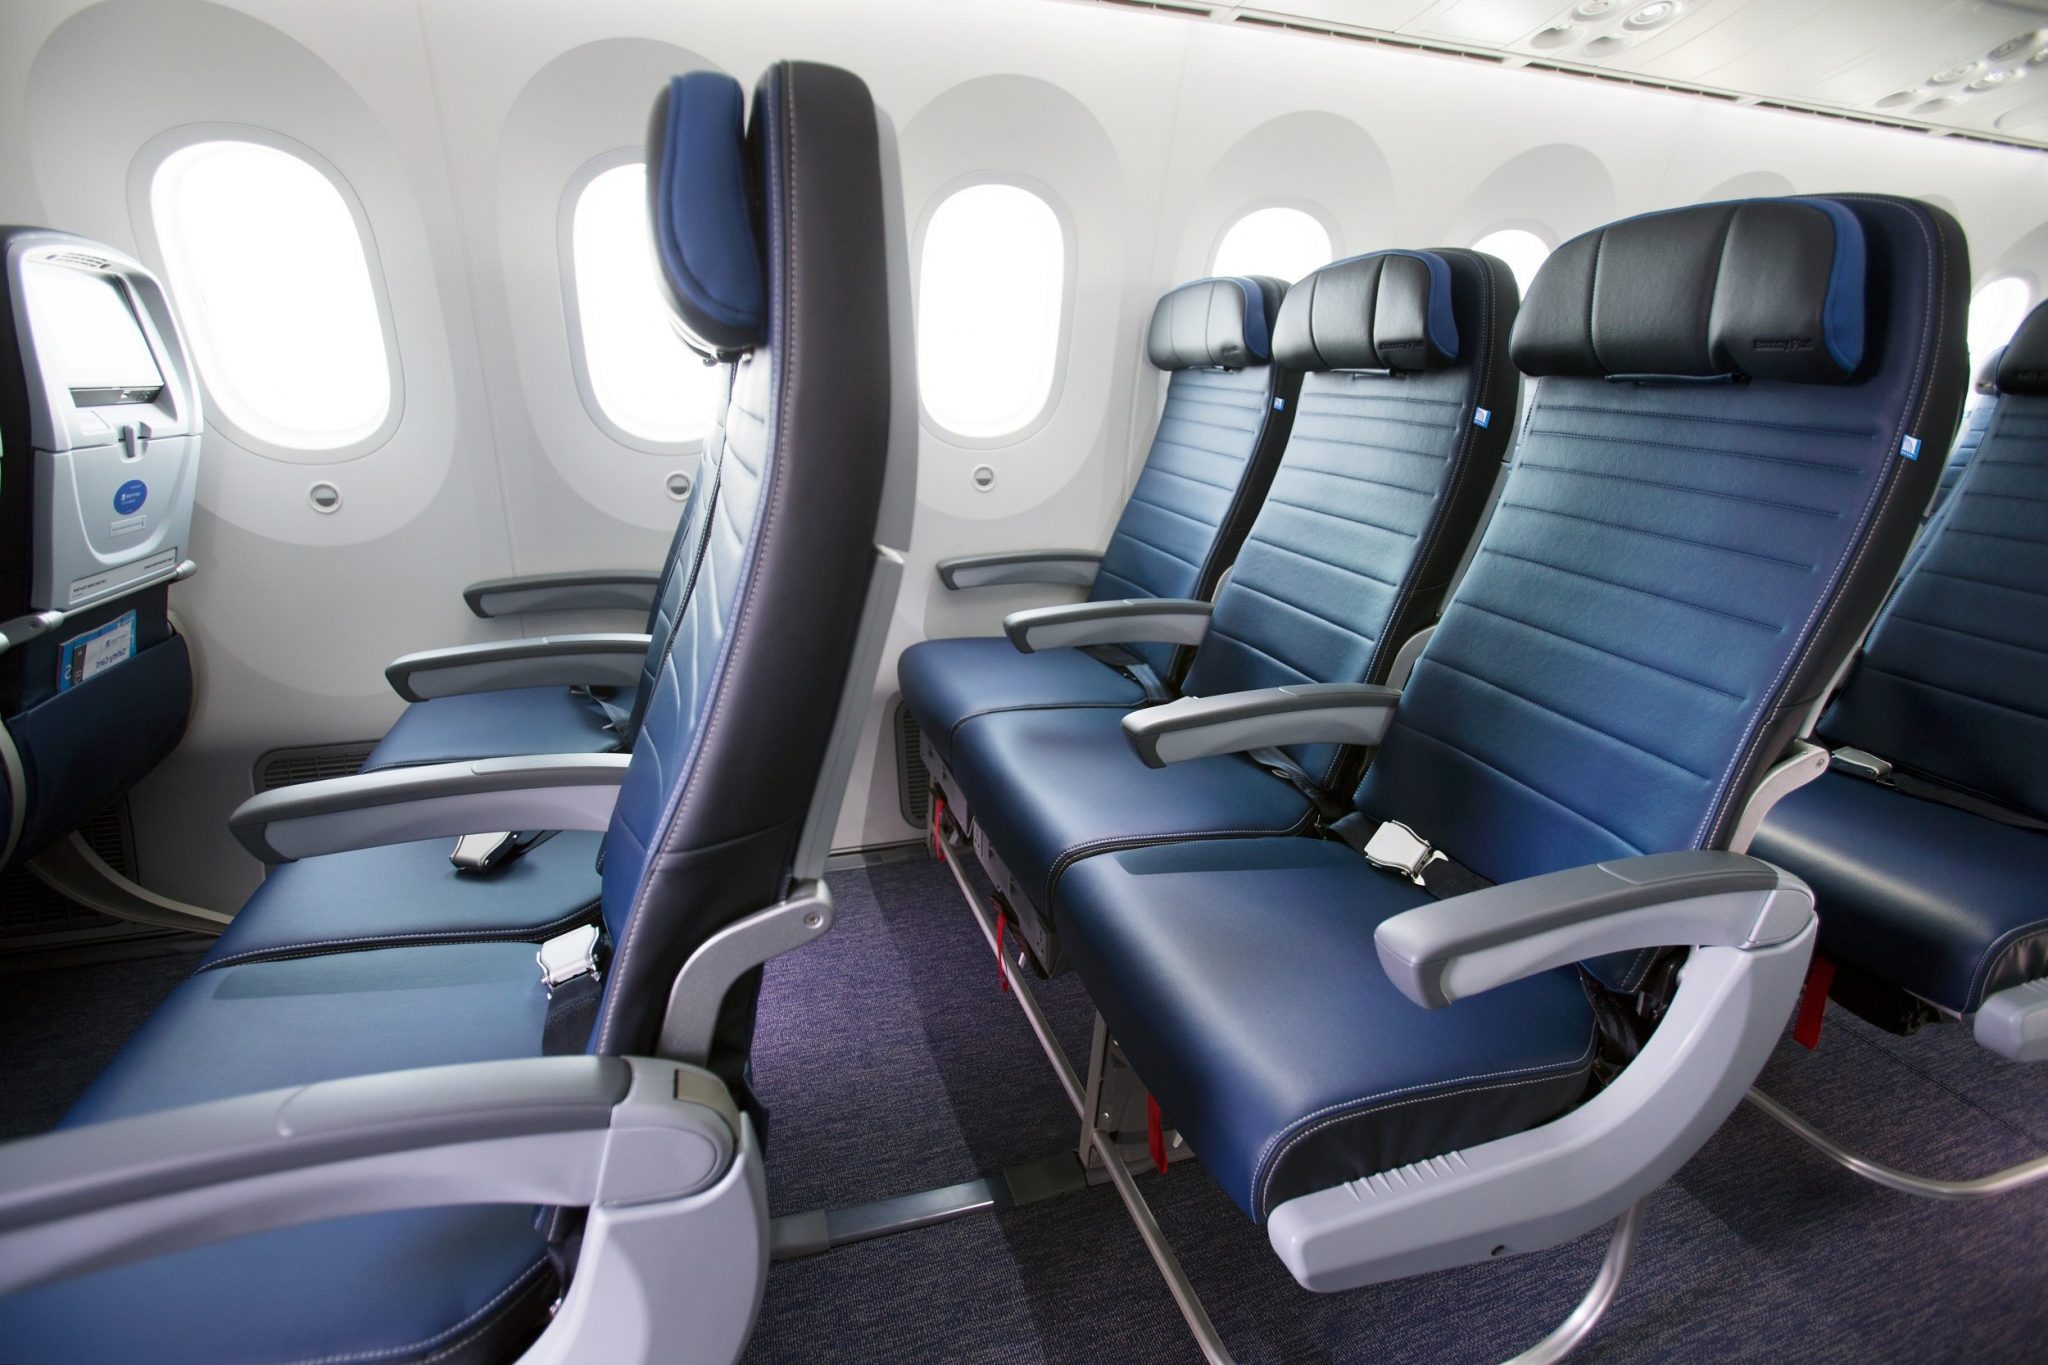 United Airlines Economy Plus seating. The airline's flight attendants will be incentivized to vaccinate by additional days off. 